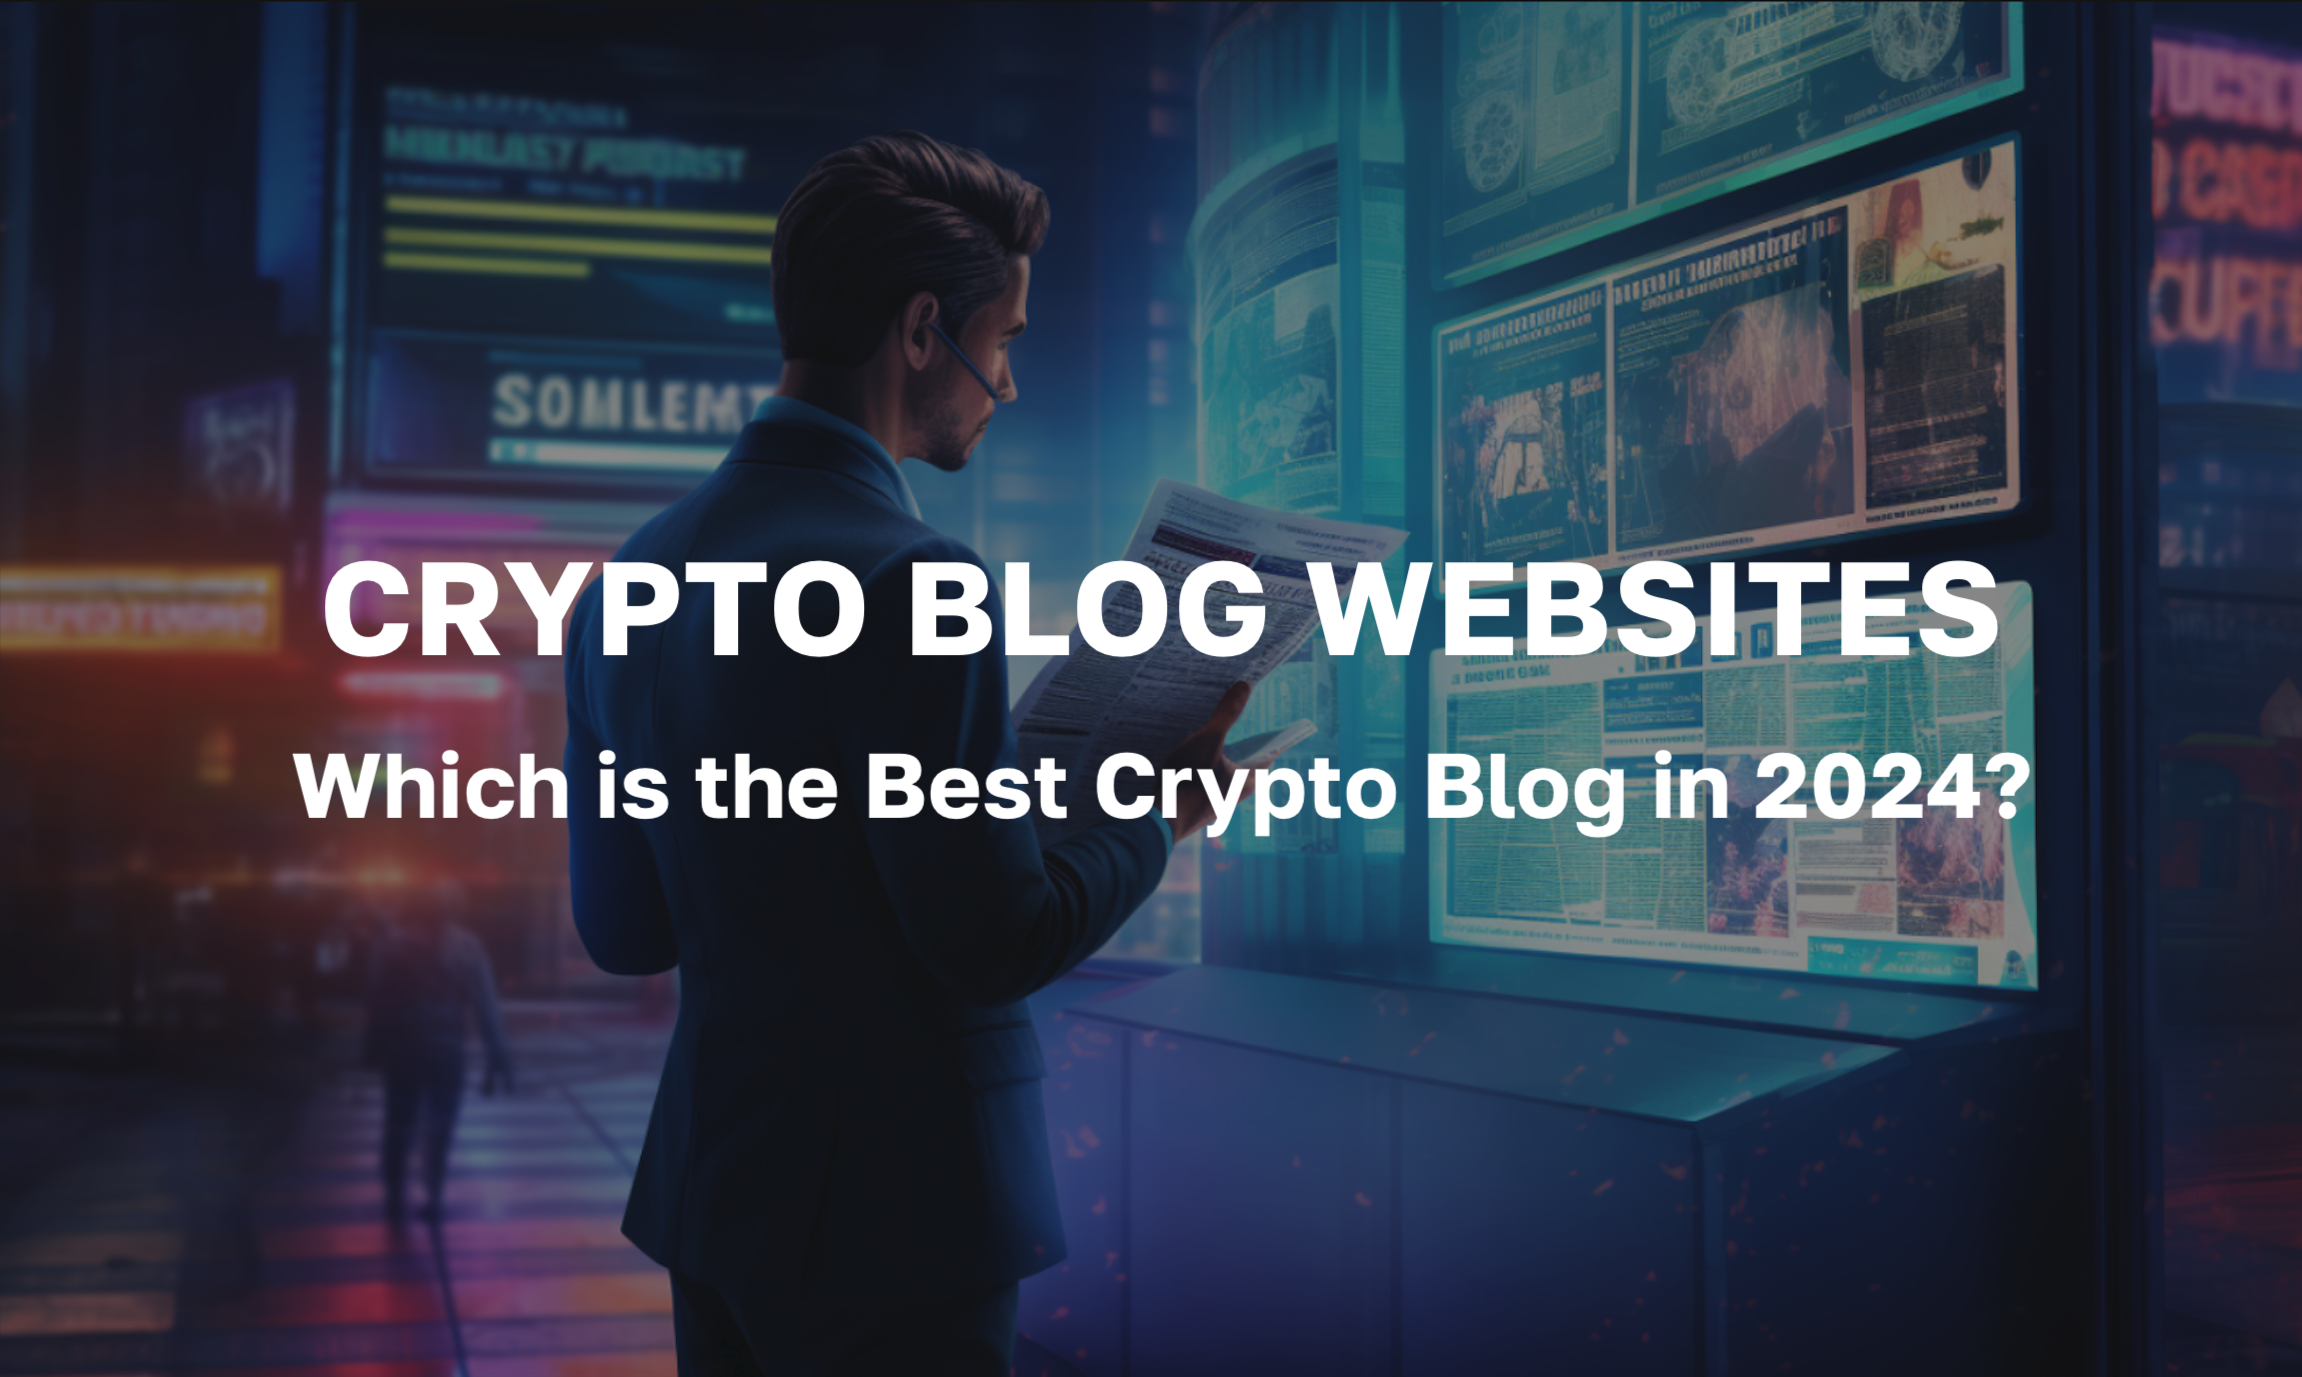 Crypto Blog Websites - Which is the Best Crypto Blog in 2024?